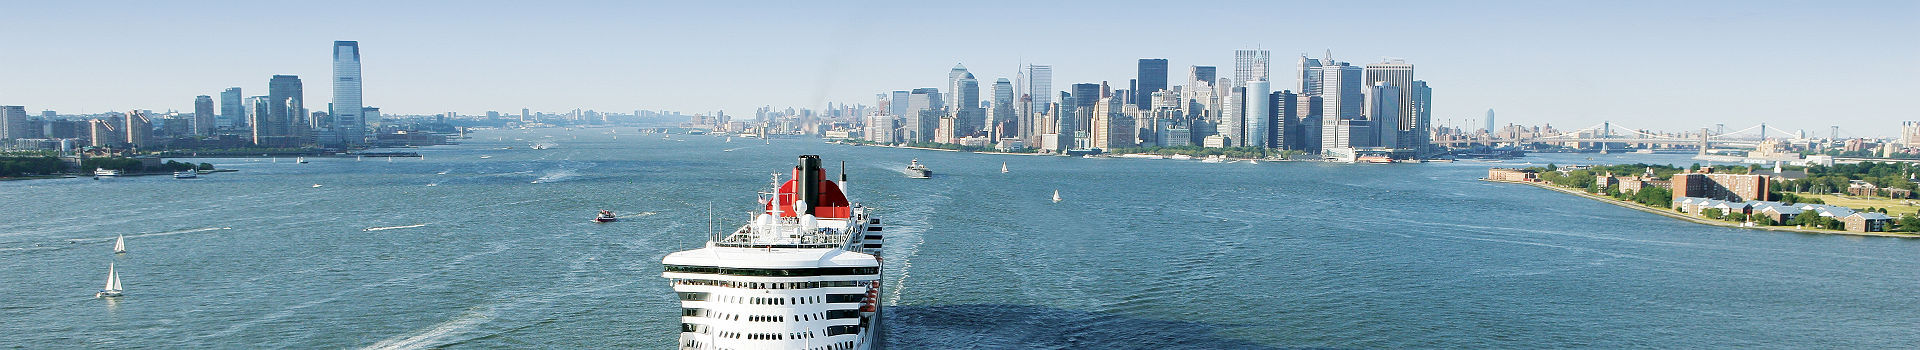 Queen Mary II - New-York - USA